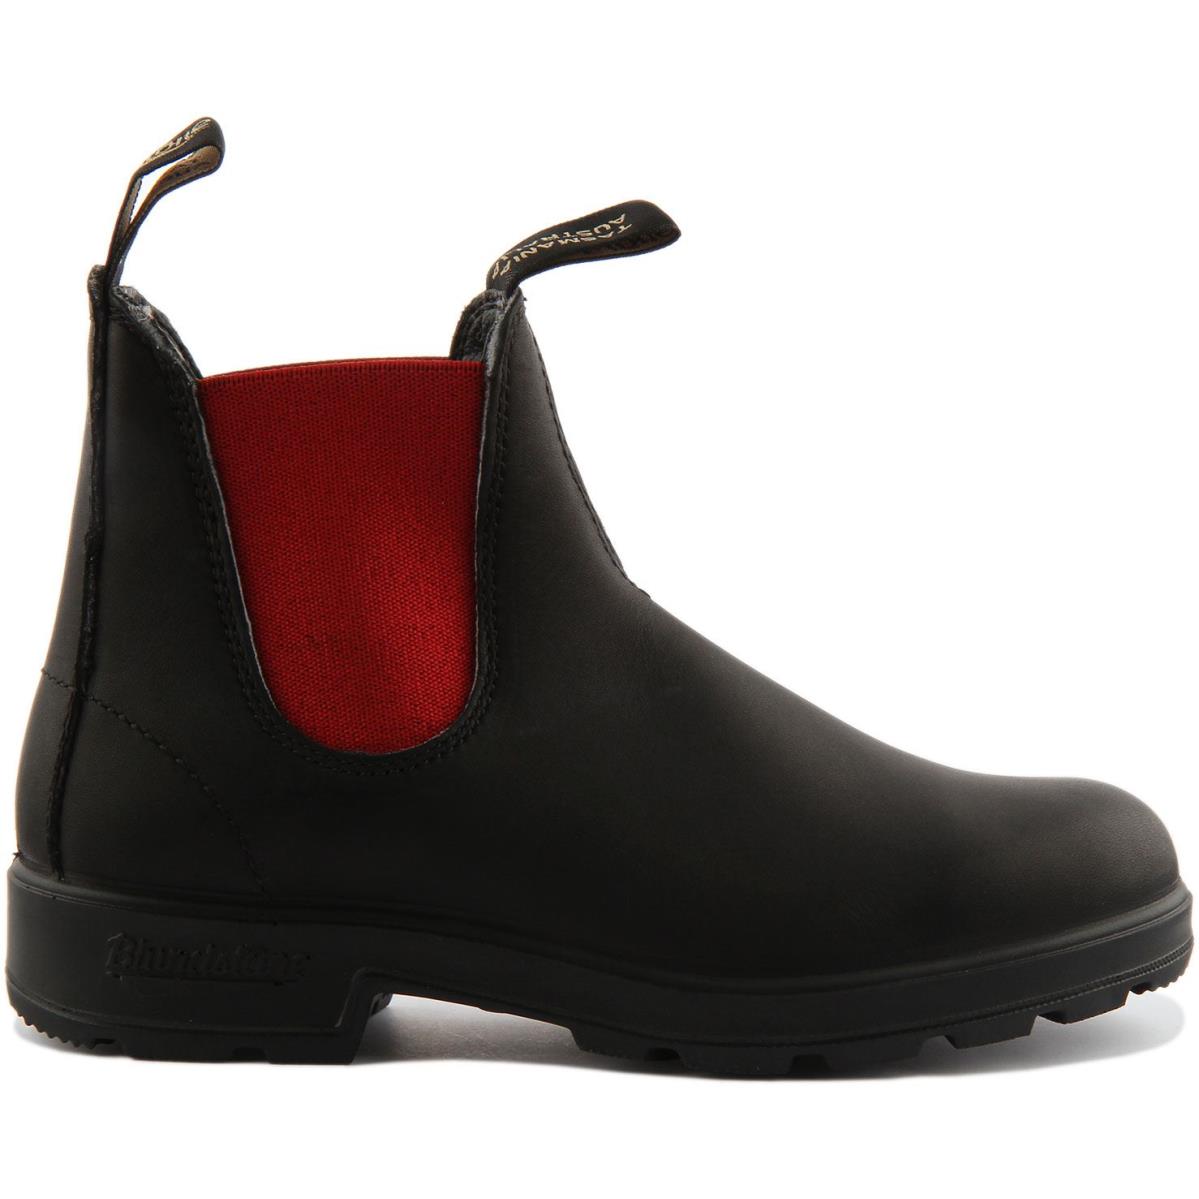 Blundstone 508 Unisex Pull On Leather Chelsea Boots In Black Red Size US 4 - 13